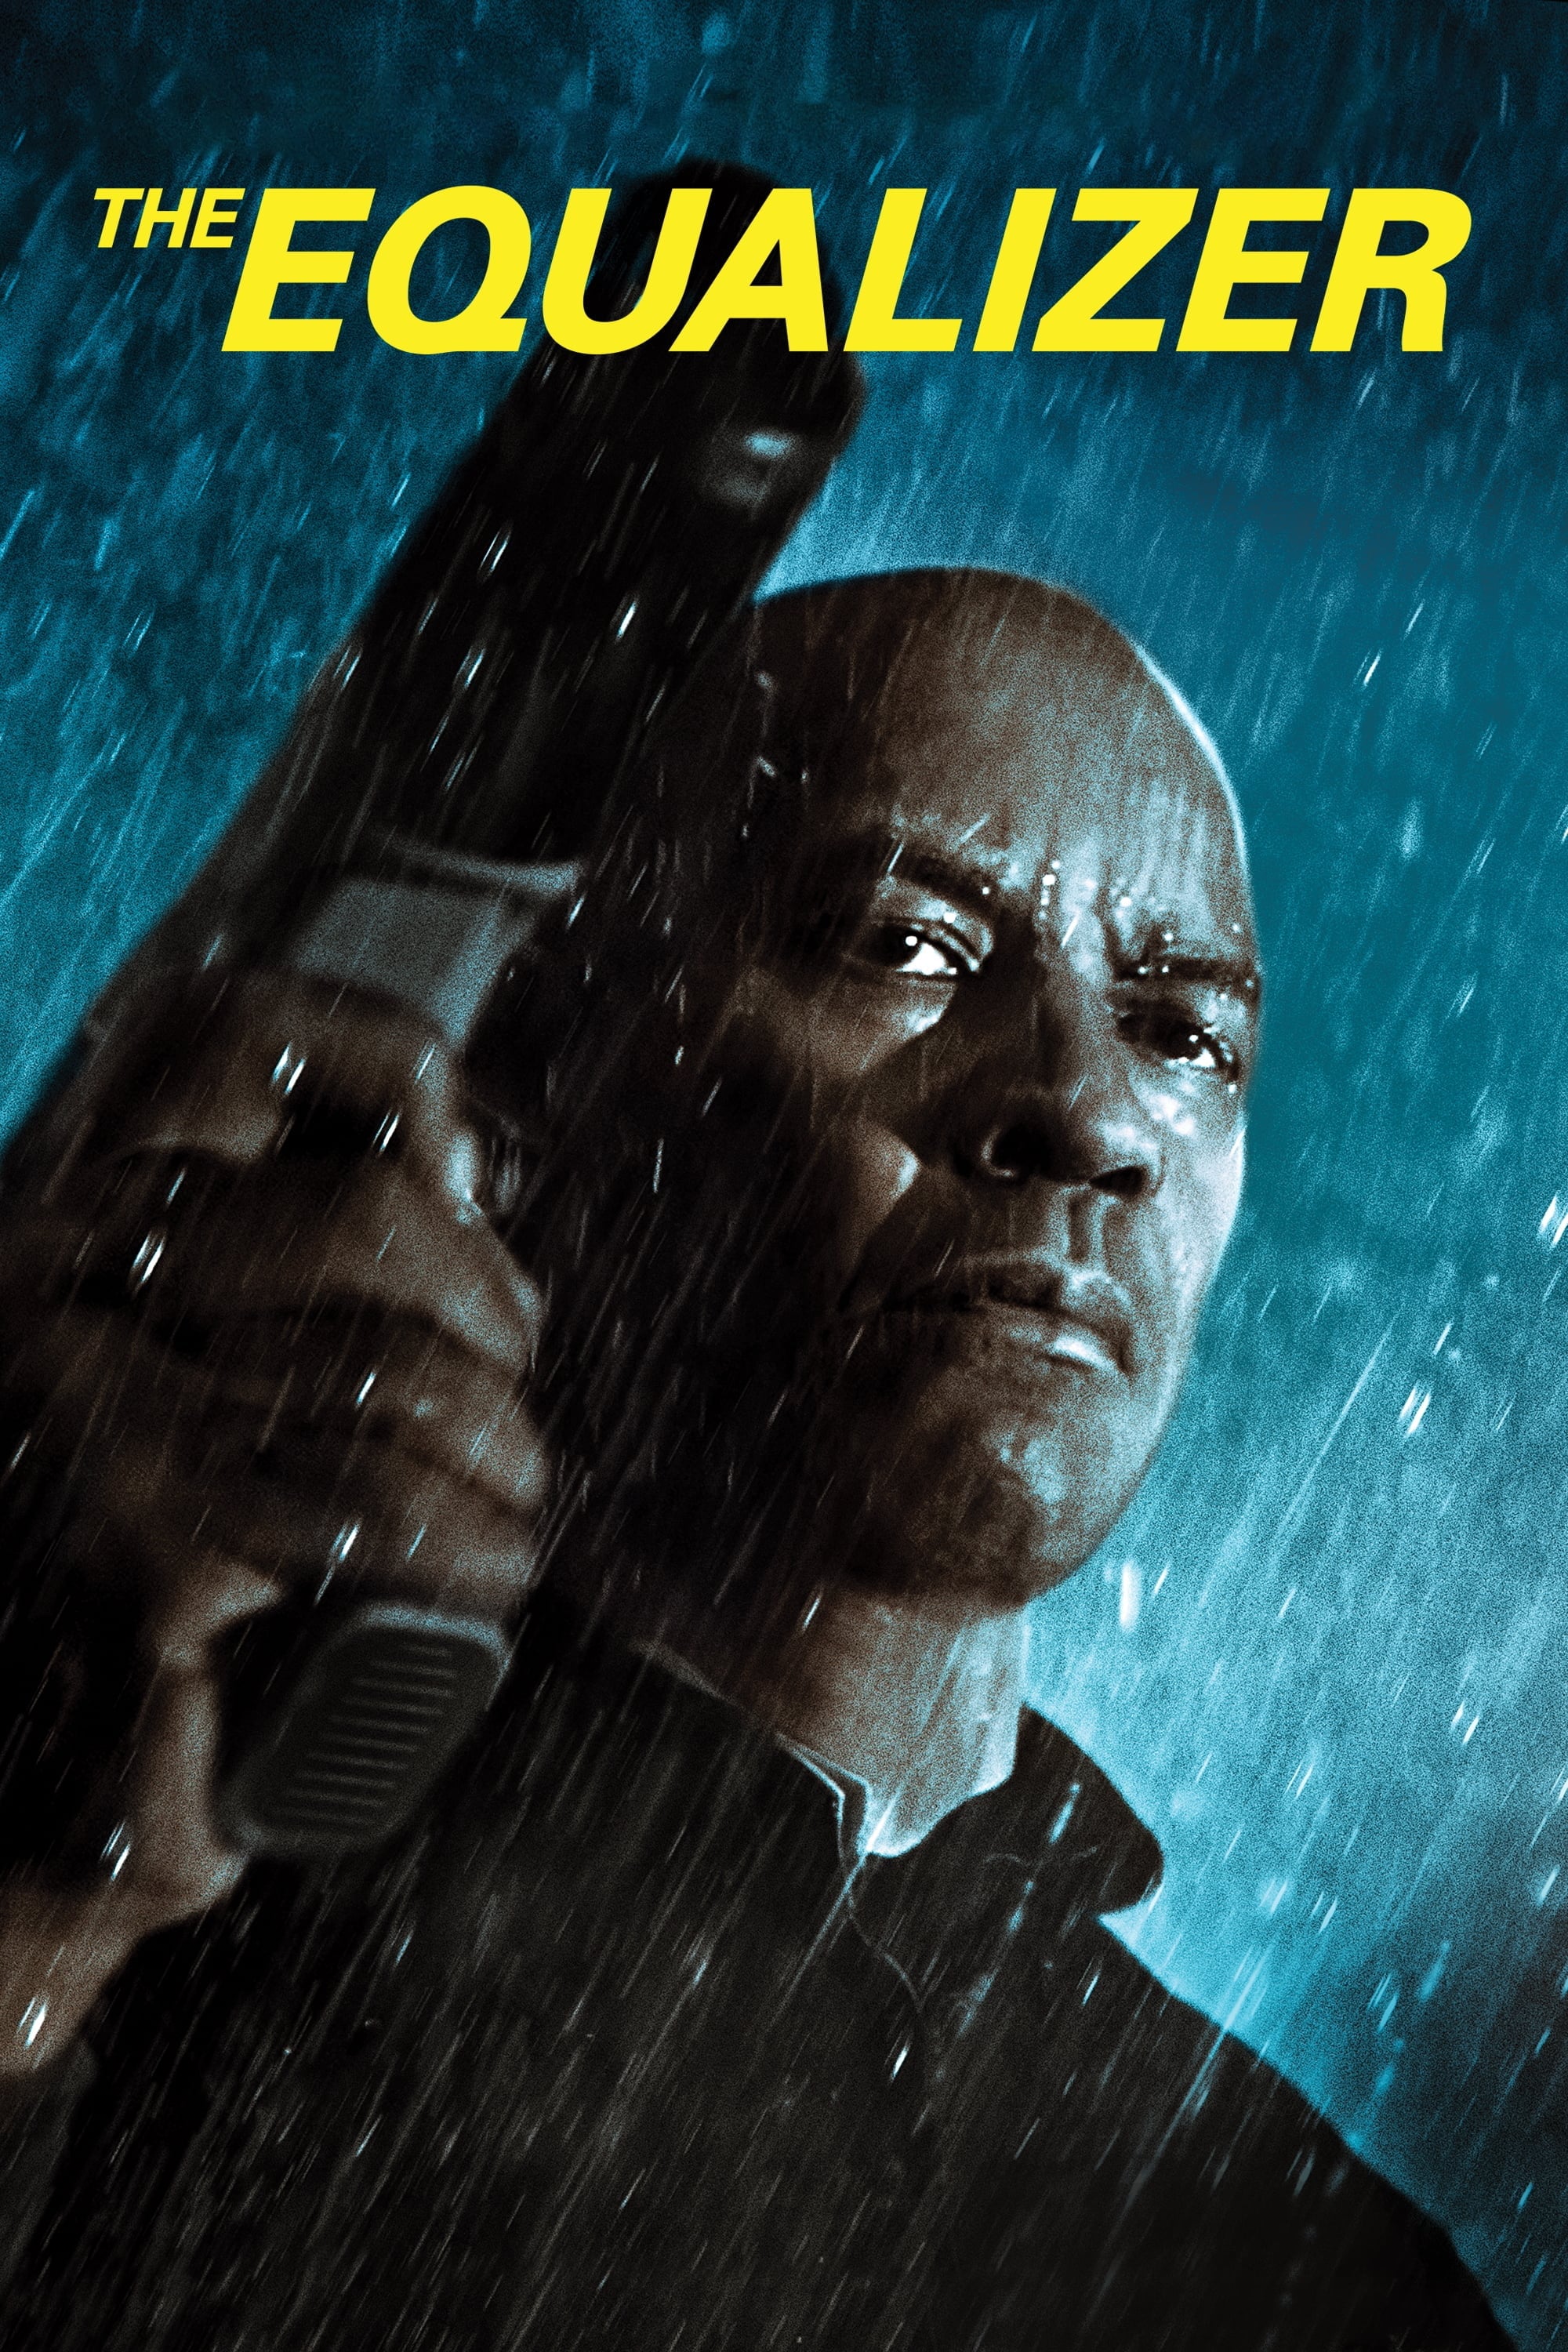 The Equalizer (2014) REMUX 4K HDR Latino – CMHDD